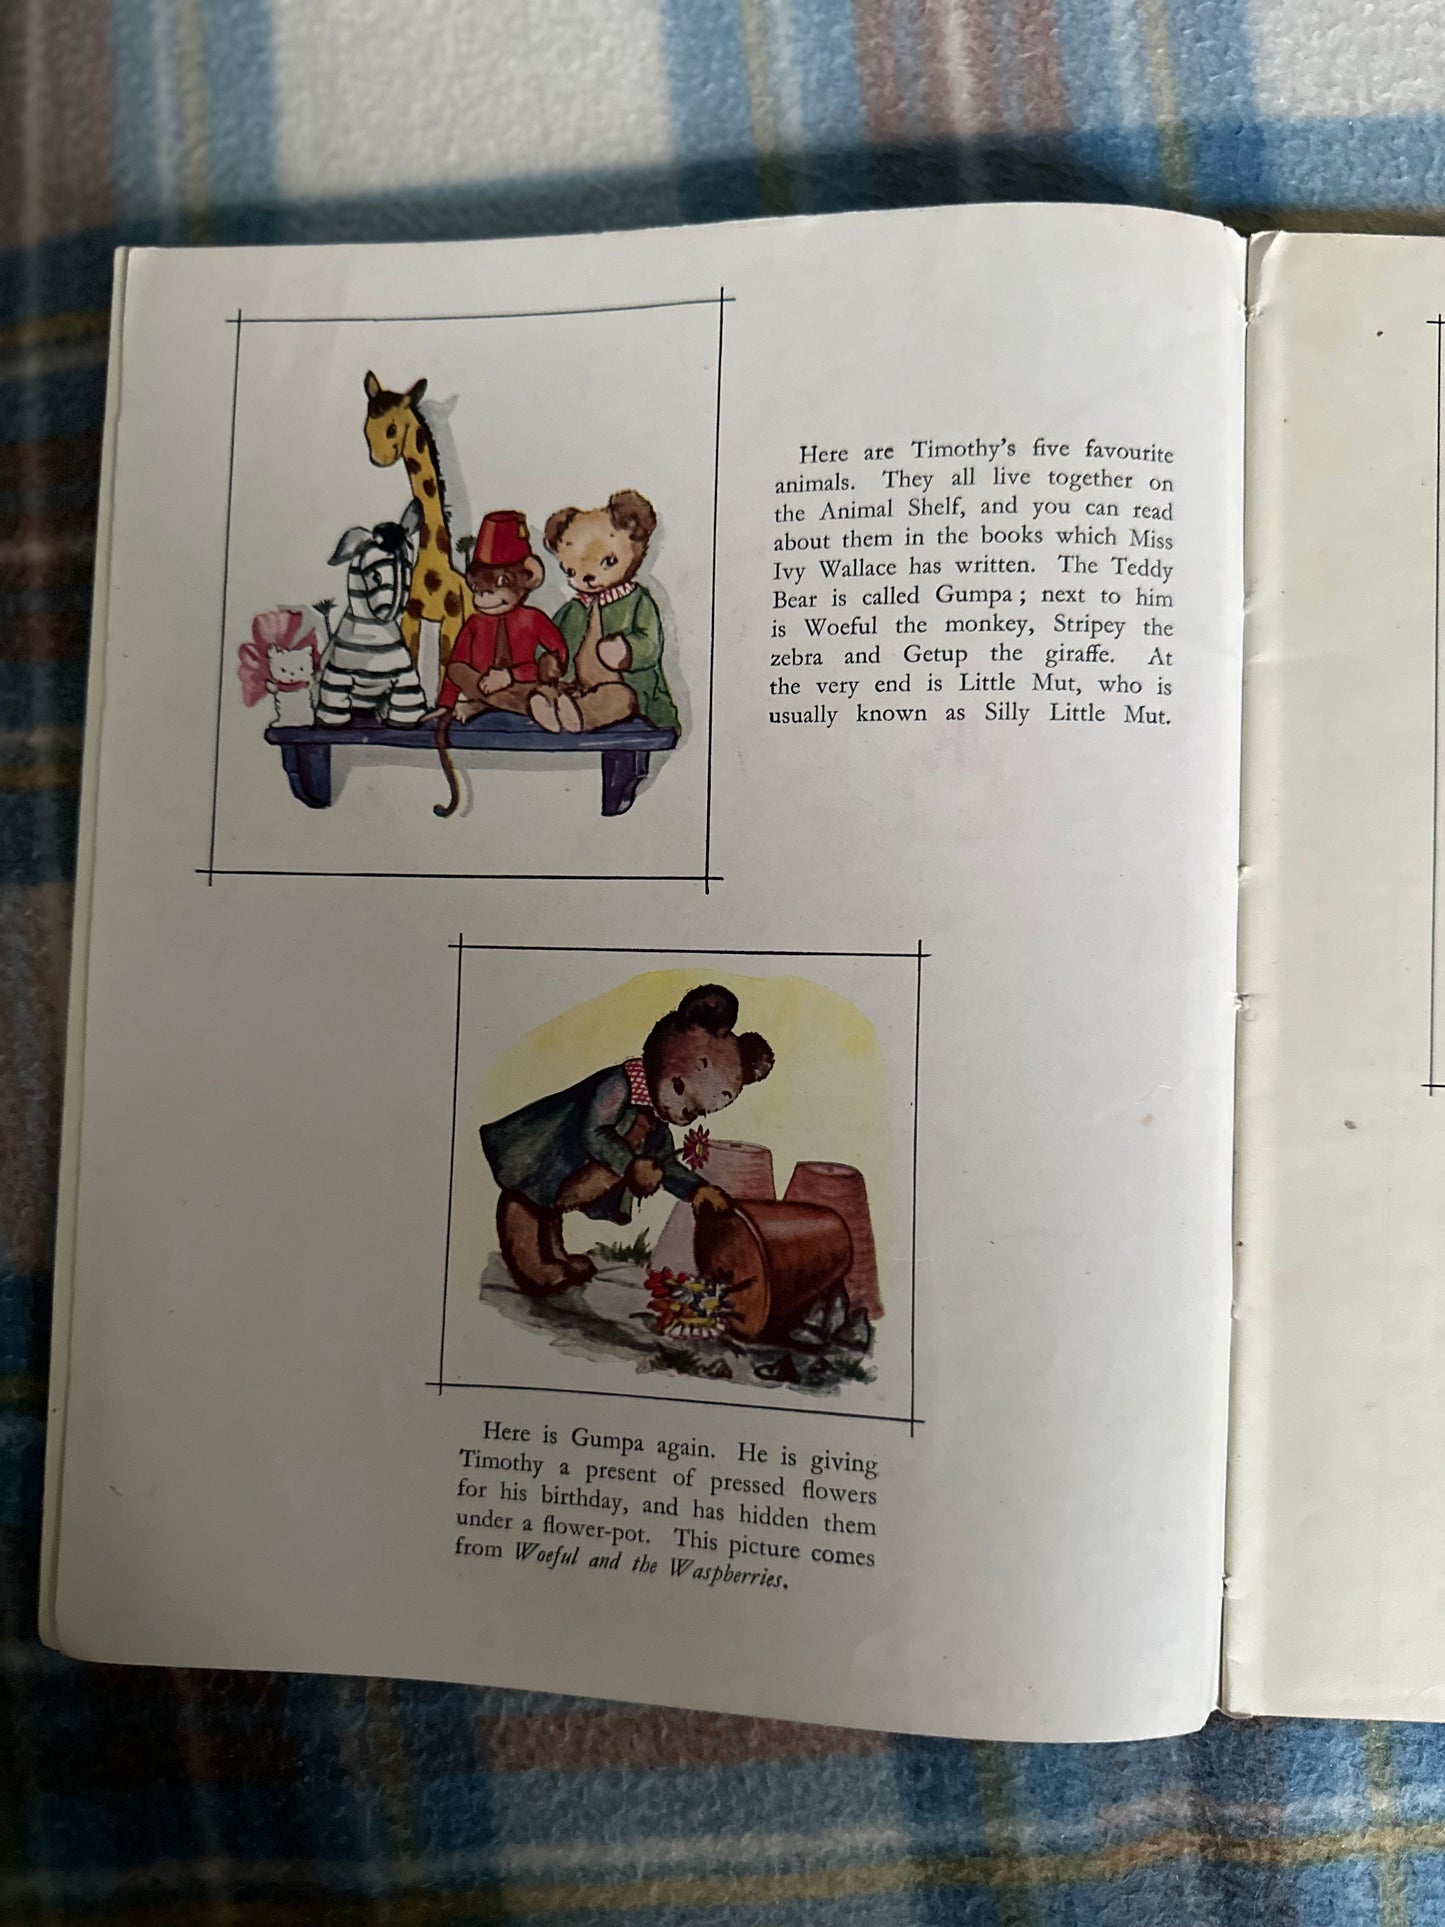 1950 The Animal Book Shelf Paint Book - Ivy L. Wallace (Collins)